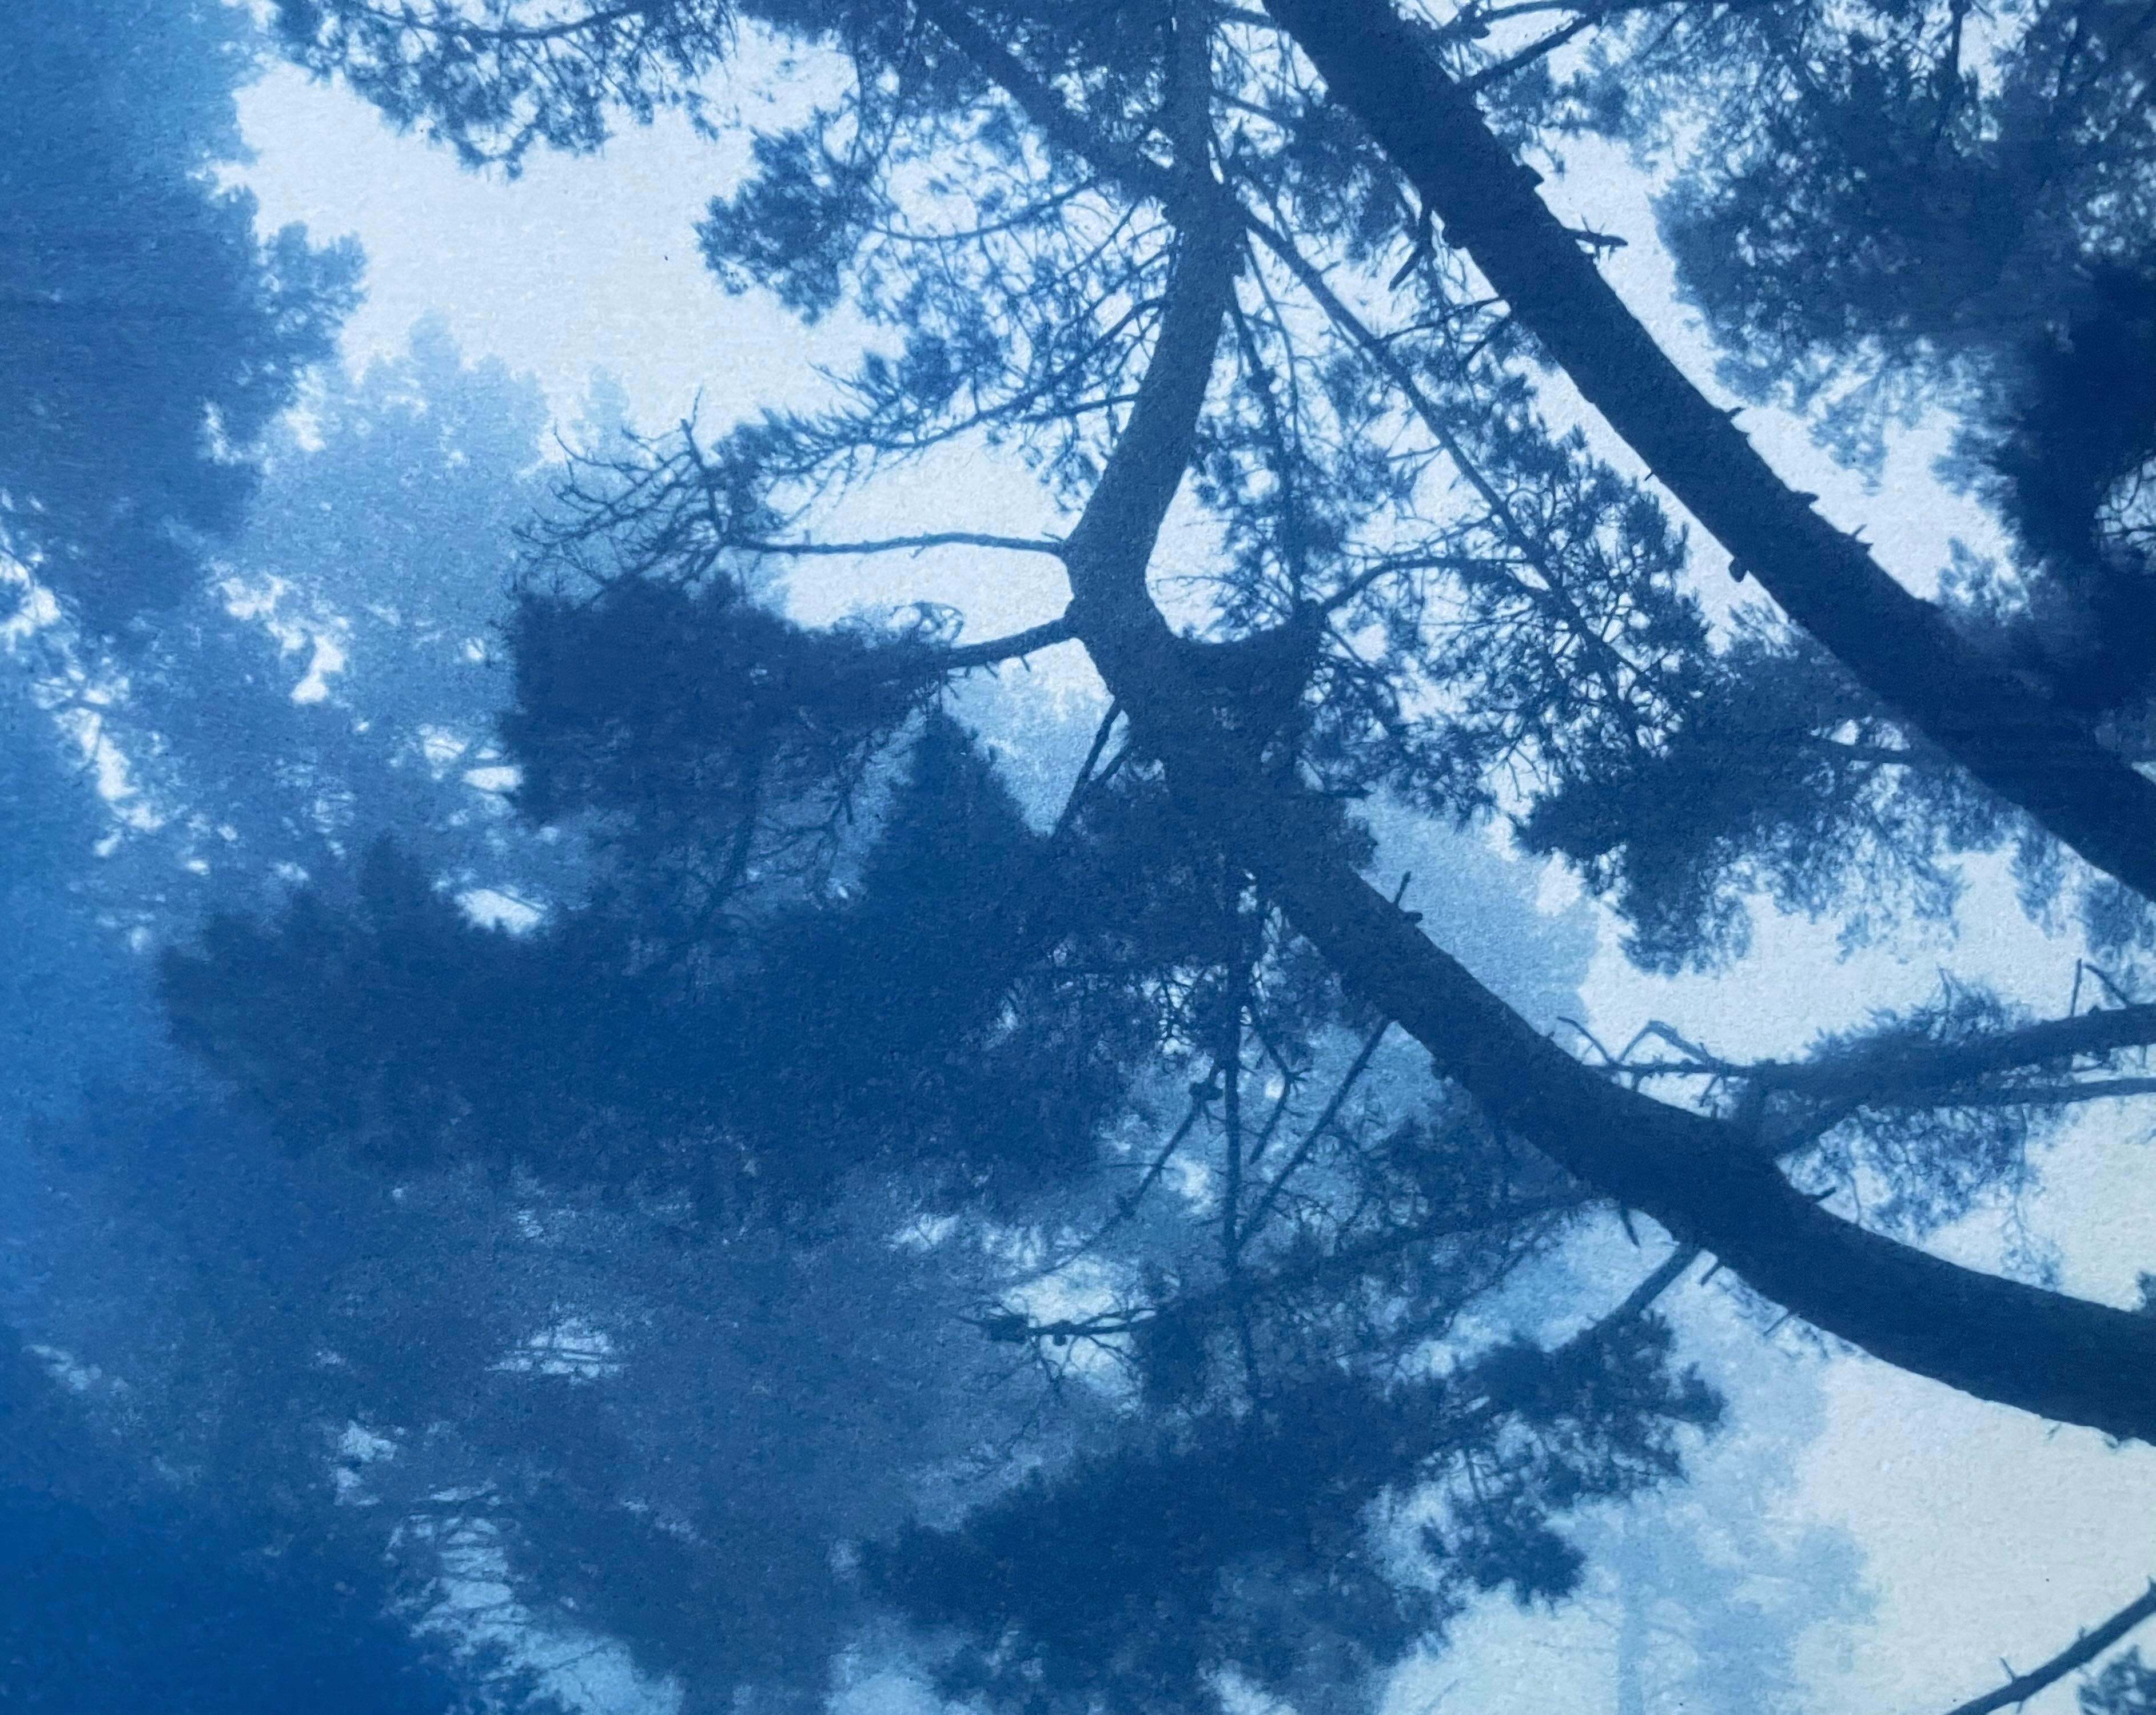 Forest Sunrise (Hand-printed cyanotype, 18 x 24 inches) - Realist Print by Christine So